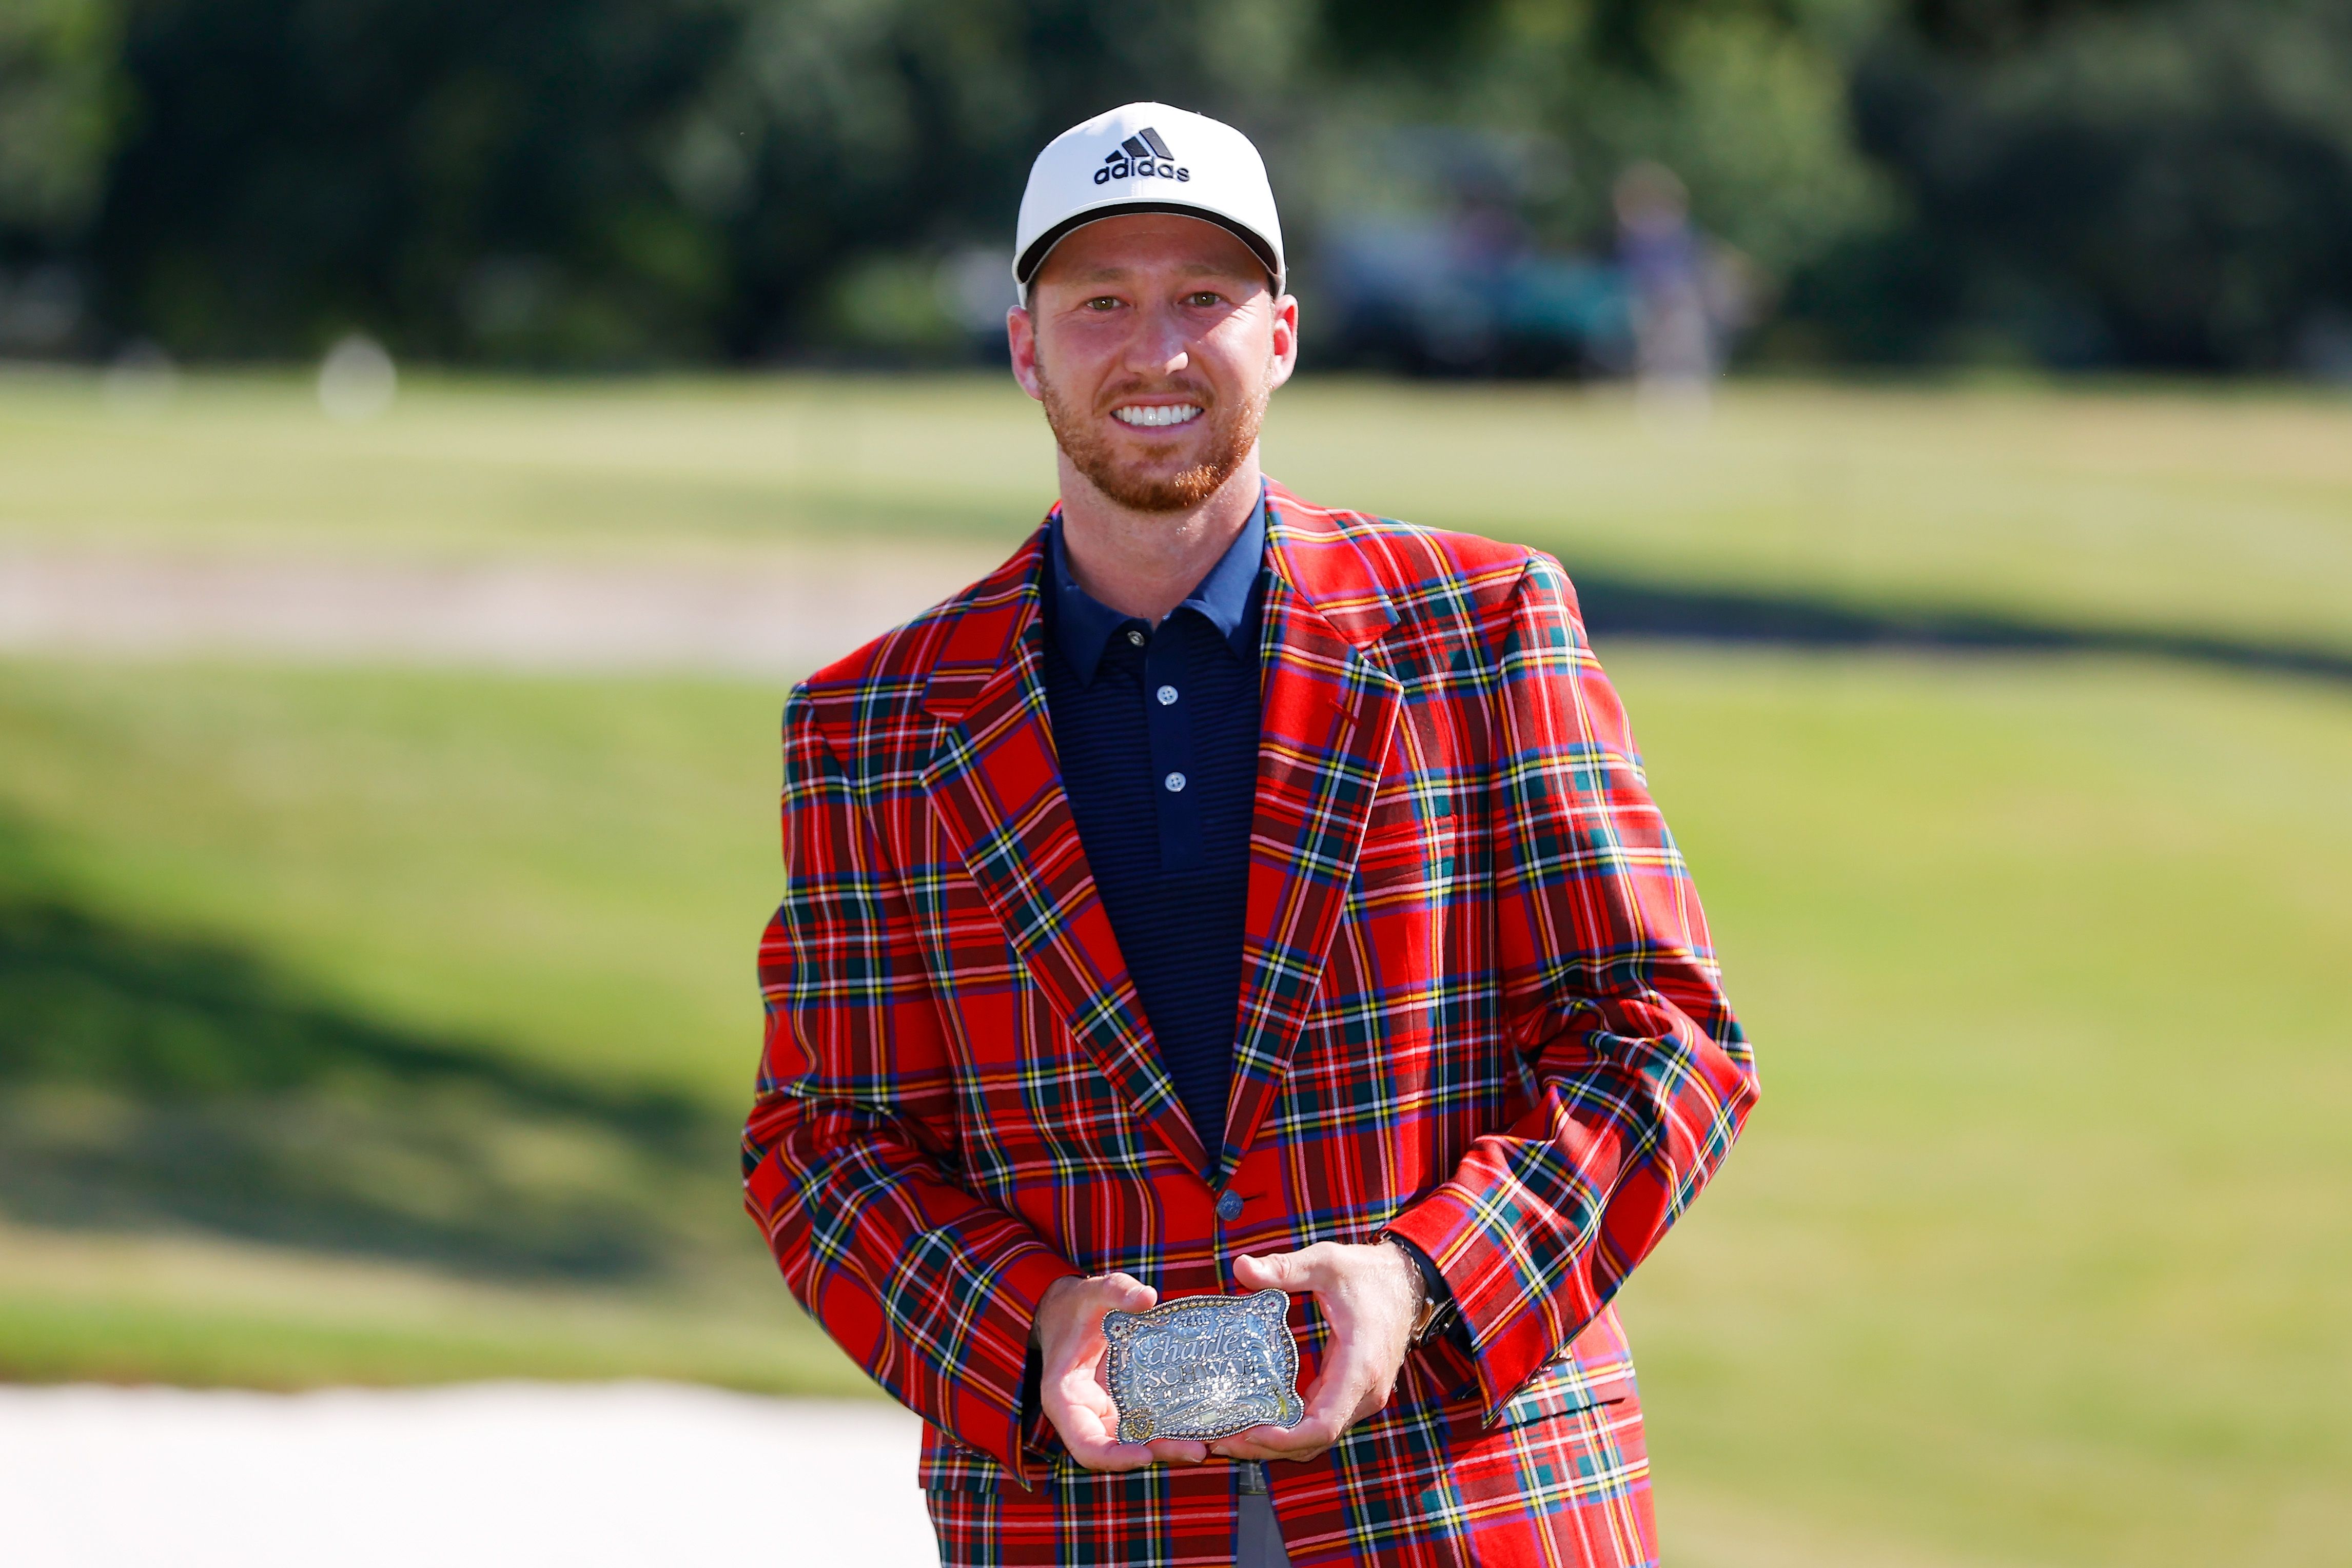  Daniel Berger with the plaid jacket and belt buckle after winning the Charles Schwab Challenge on June 14, 2020  | Source: Getty Images